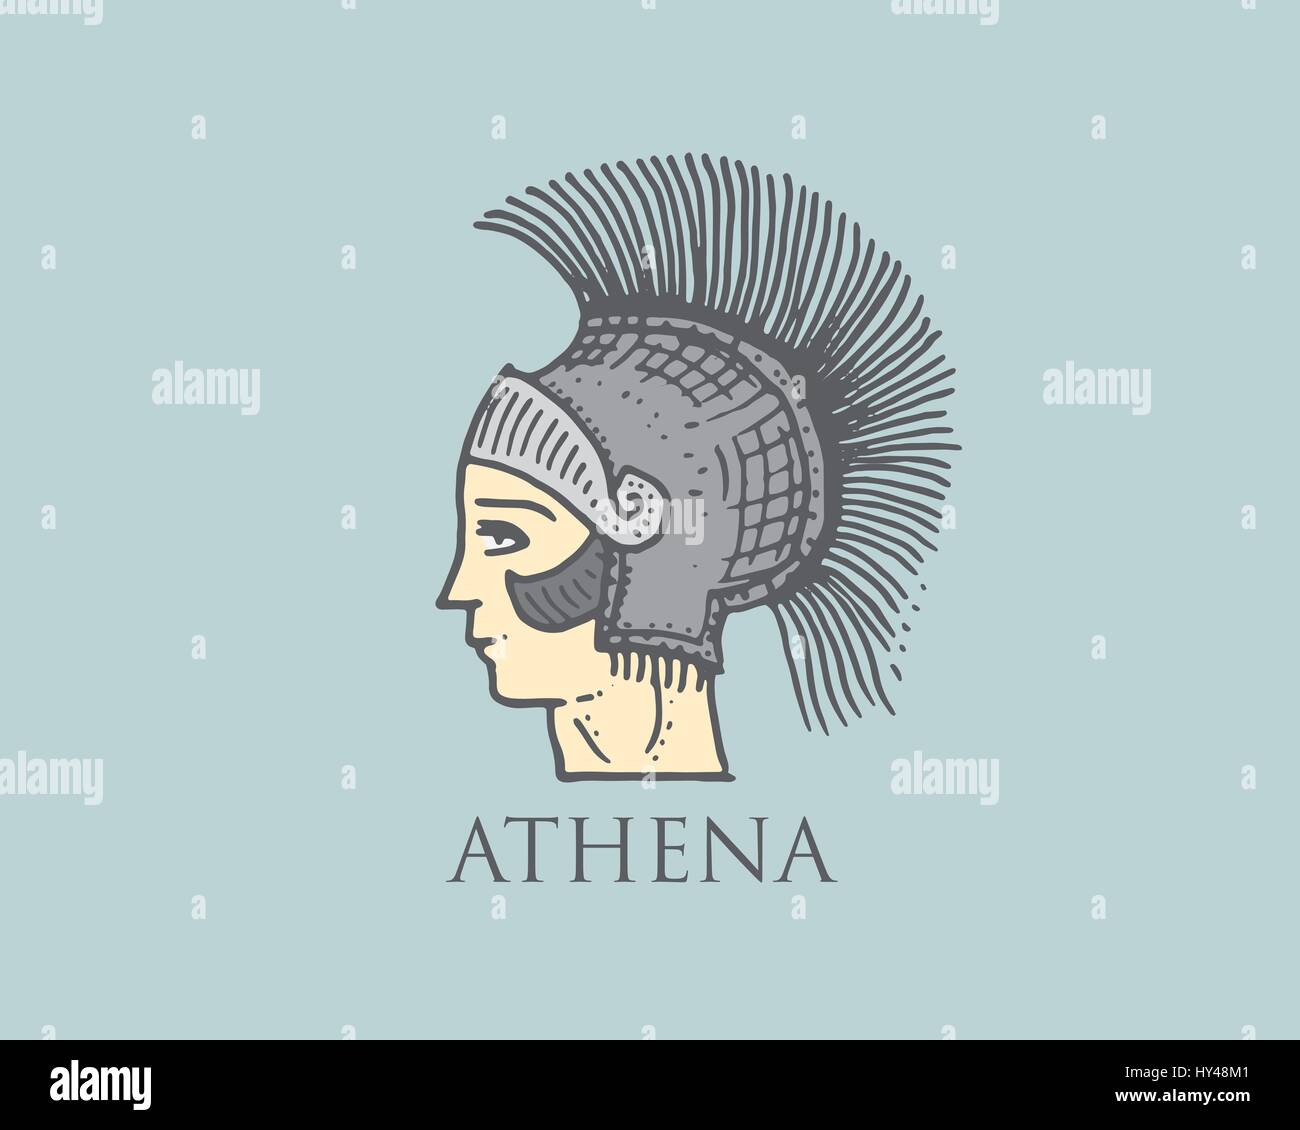 Godness Athena logo ancient Greece, antique symbol vintage, engraved hand drawn in sketch or wood cut style, old looking retro. Stock Vector